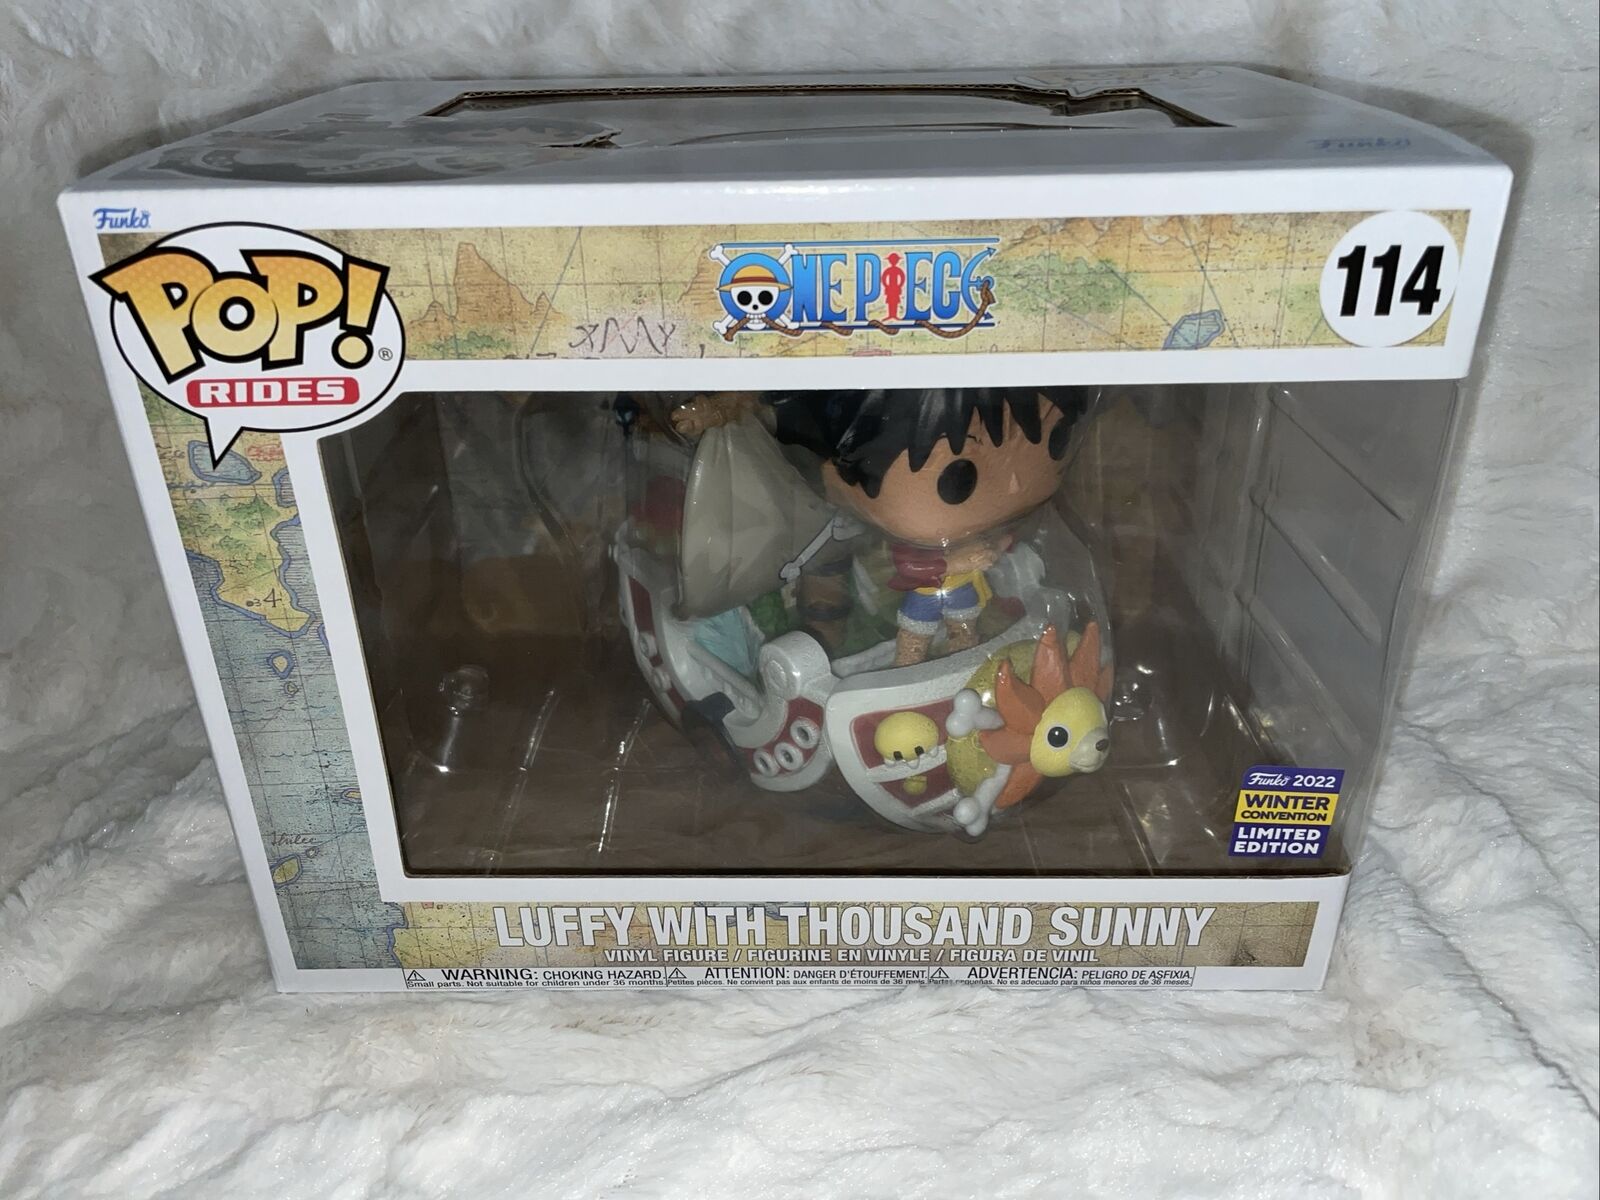 Funko Pop Rides: One Piece - Luffy With Thousand Sunny (Winter Convention) -...